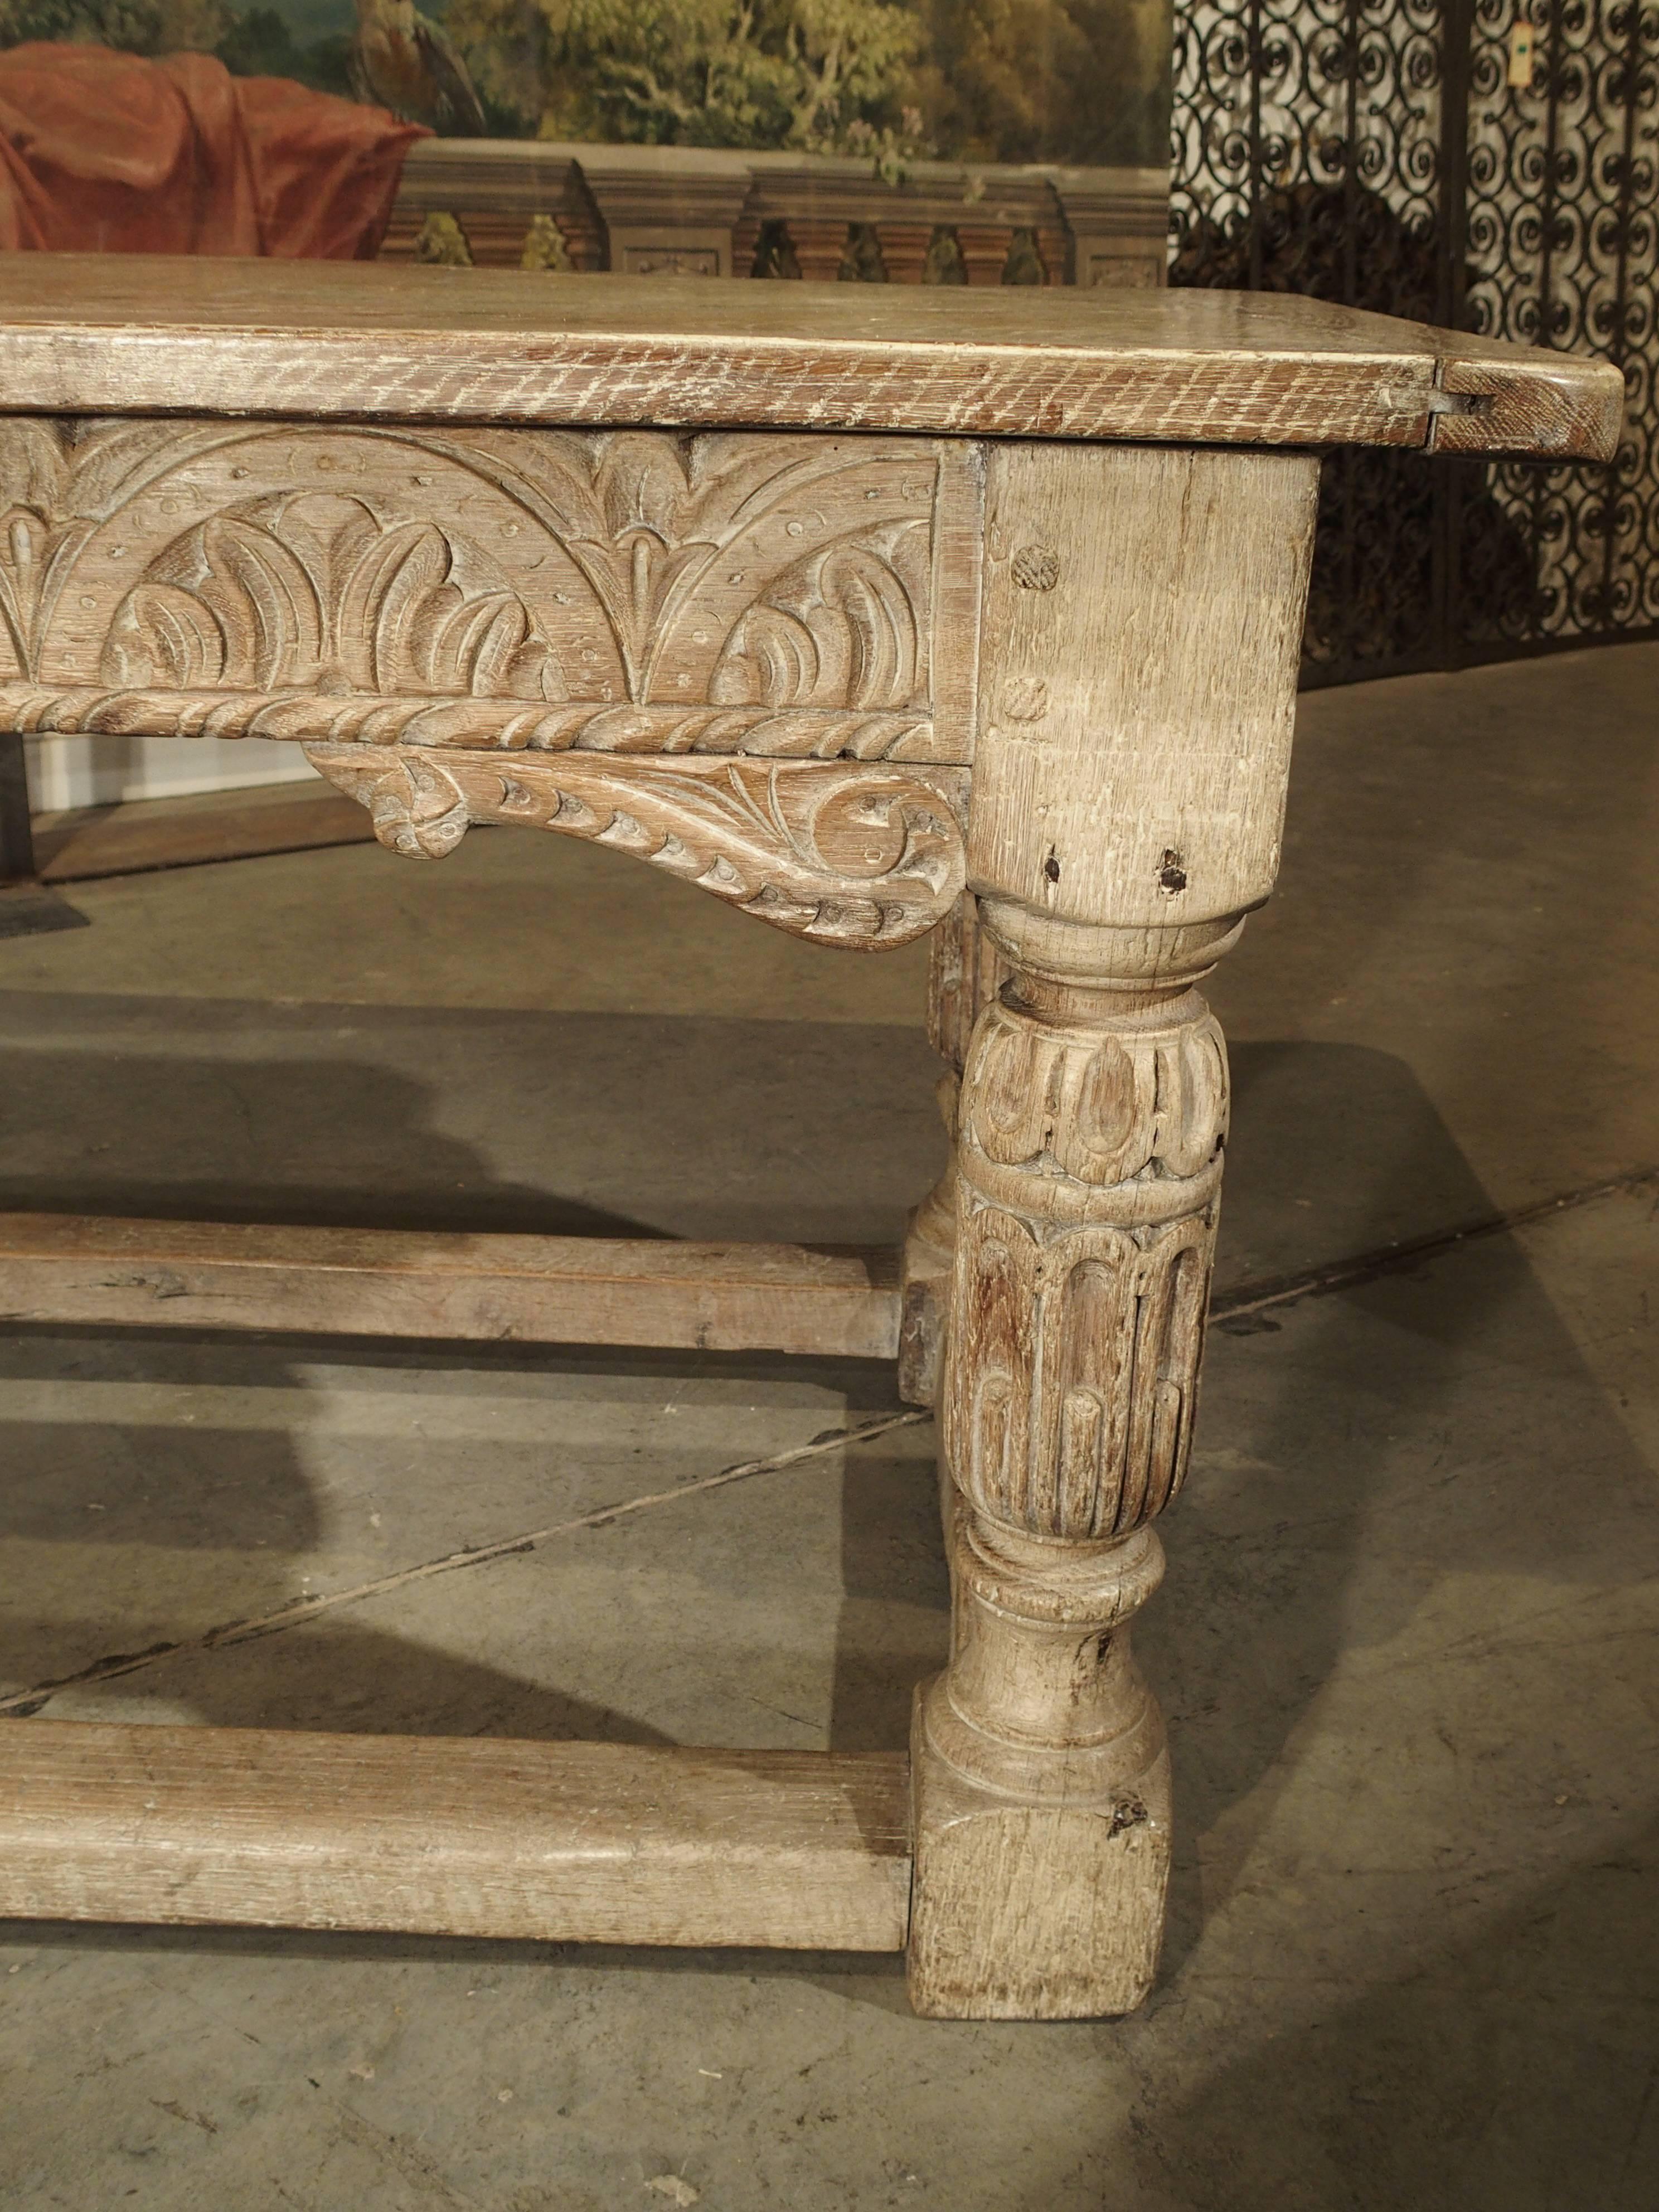 19th Century Antique Whitewashed Oak Table from England, Early 1800s